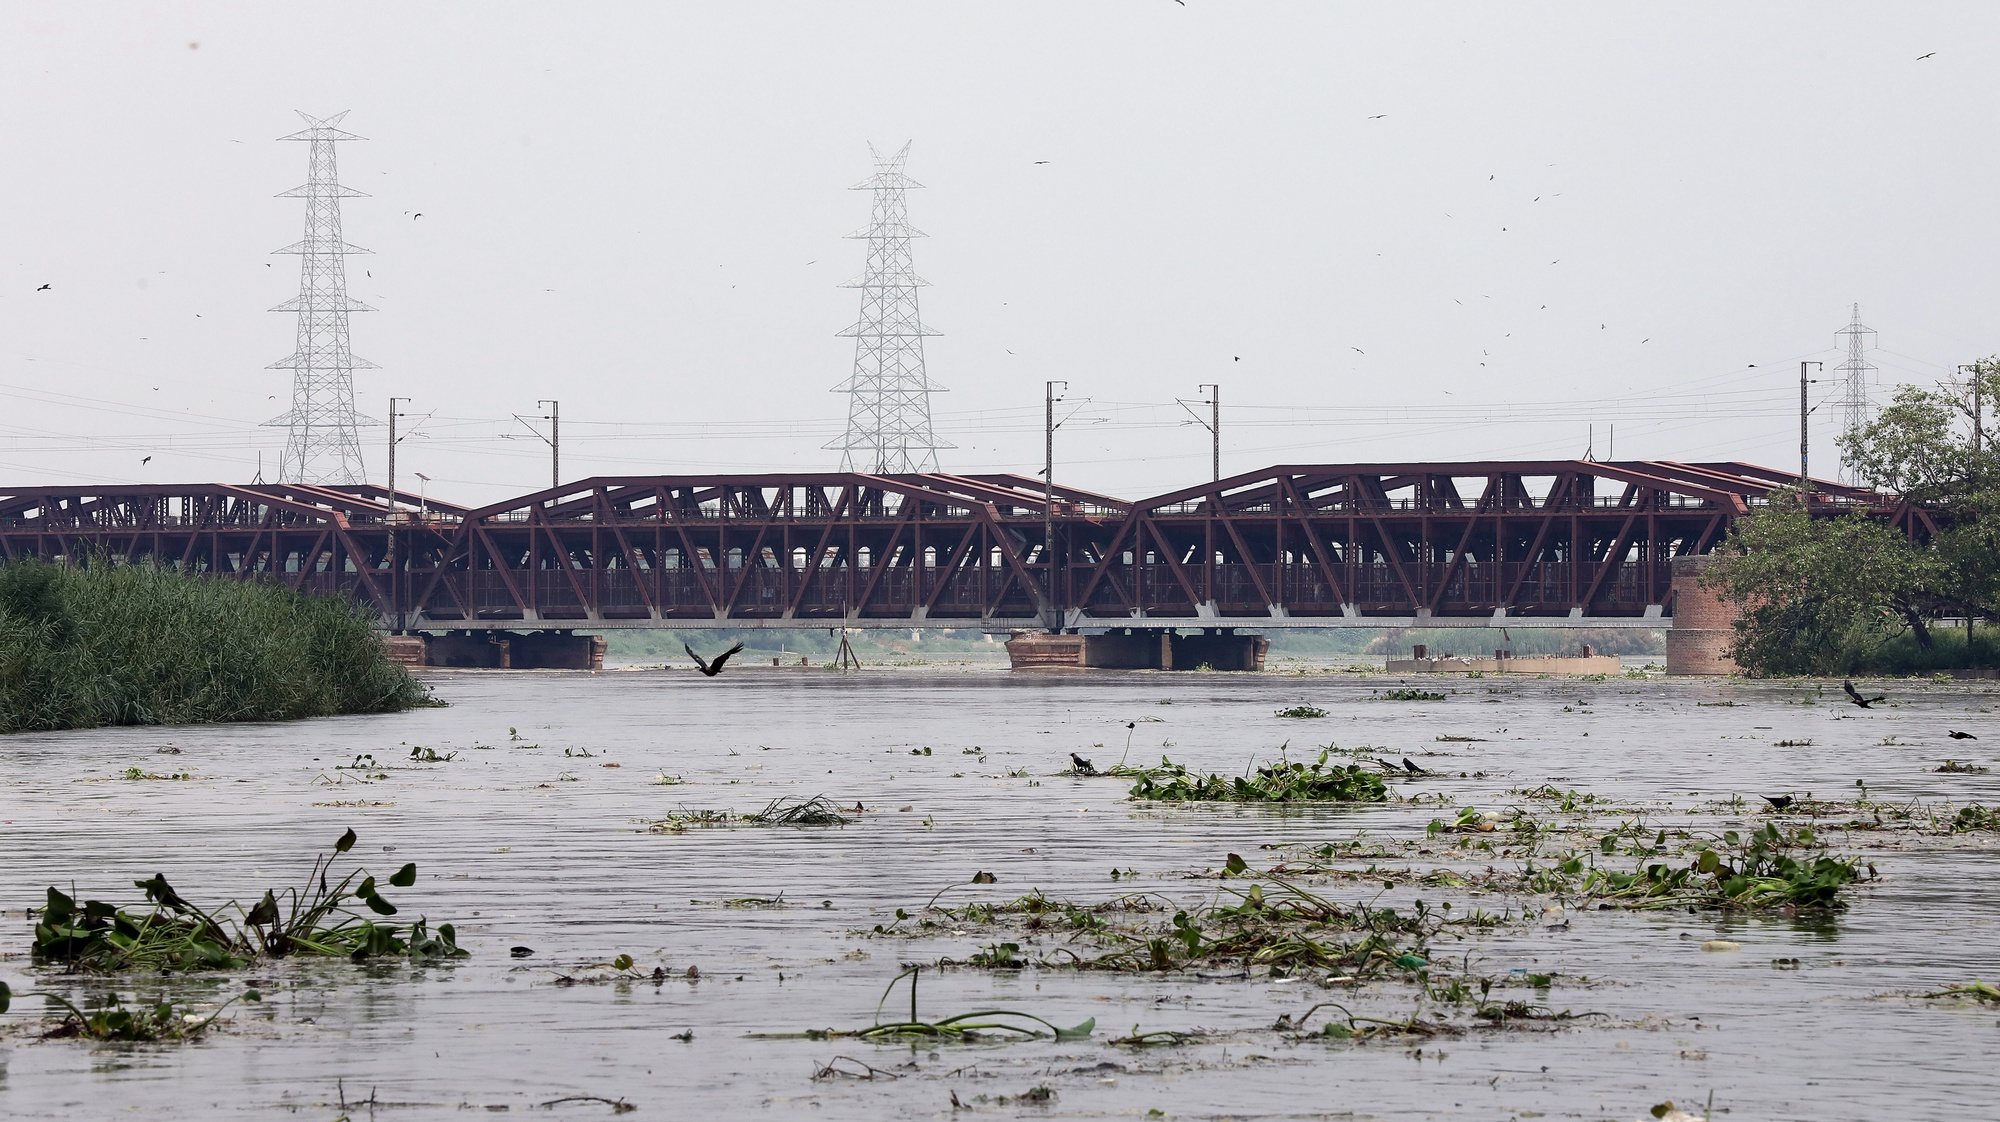 epa07780627 A view on an Old Yamuna bridge over flooded Yamuna river in New Delhi, India, 19 August 2019. Yamuna river level is above the danger mark in Delhi and government has issued warning over flooding situation and asked people living on the river bed areas to evacuate their homes due to the safety measures.  EPA/HARISH TYAGI